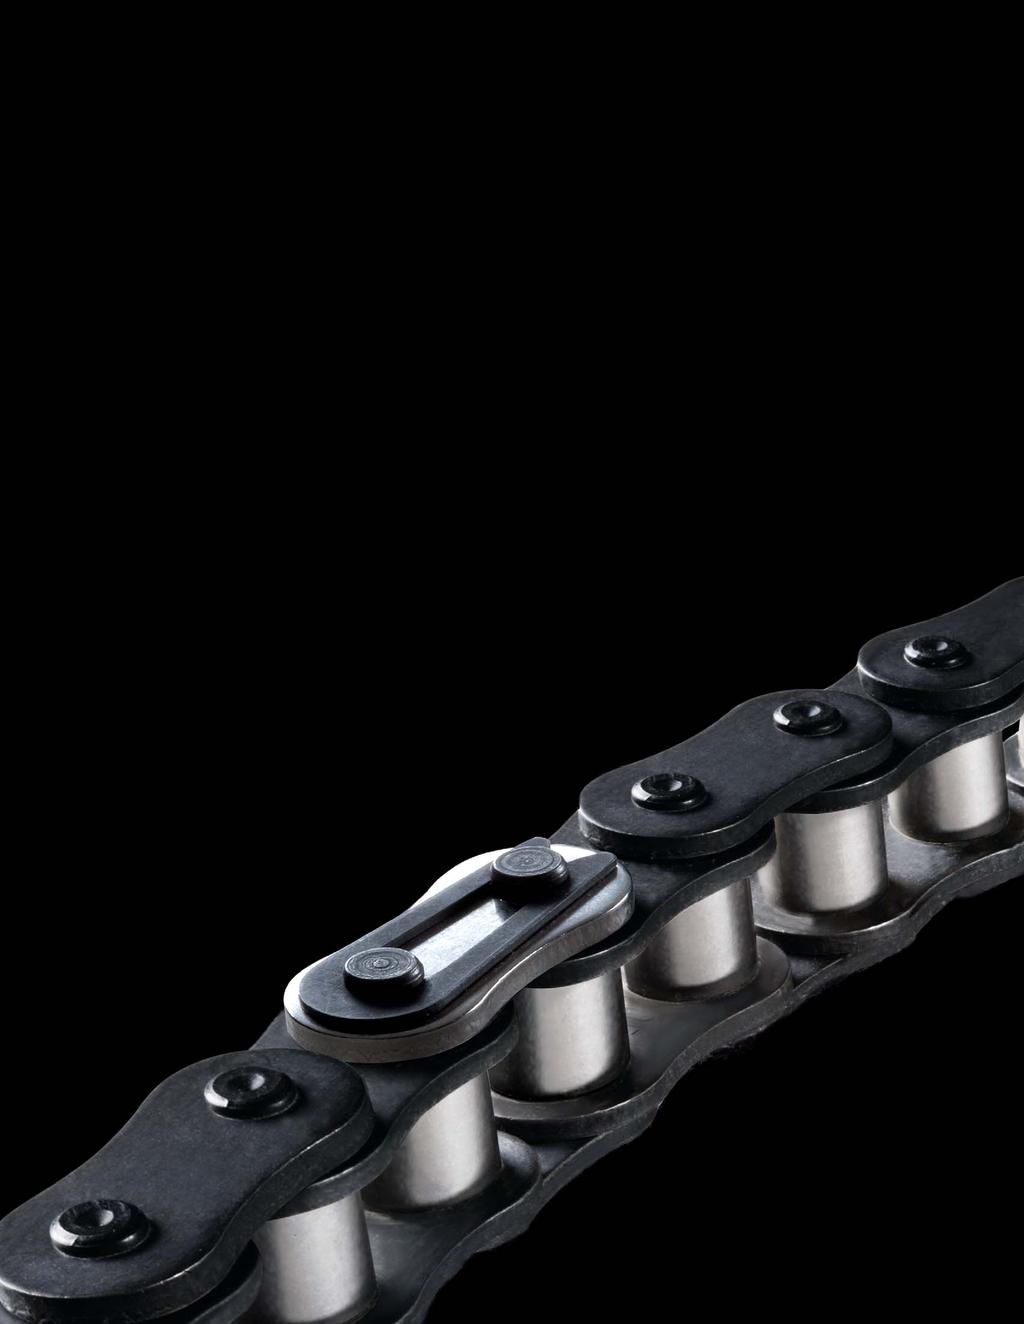 Renold Synergy Chain I 3 Built to be better Plate Shape Wide-waist profile for improved stress distribution Plate Thickness imized profile within the constraints of the standard Bushings Solid